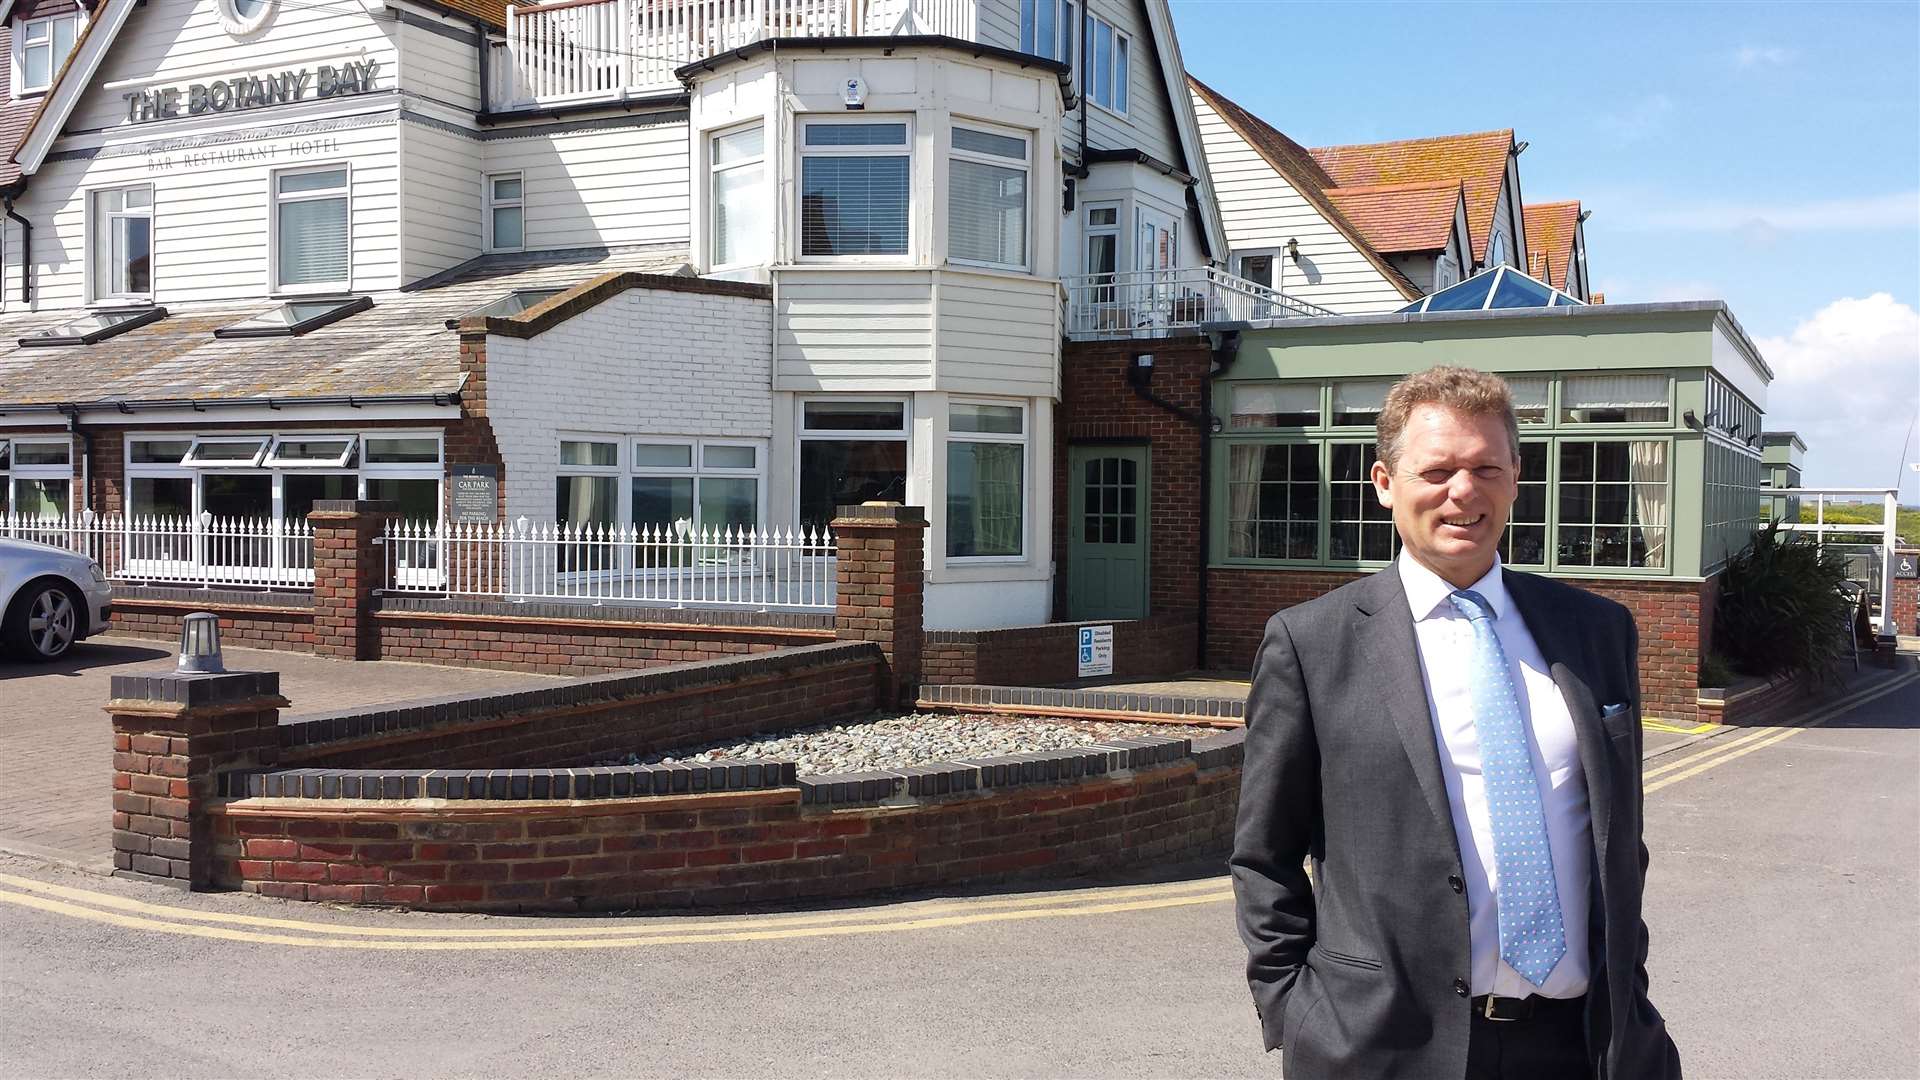 Jonathan Neame at the Botany Bay Hotel, which underwent a £1.4 million refurbishment